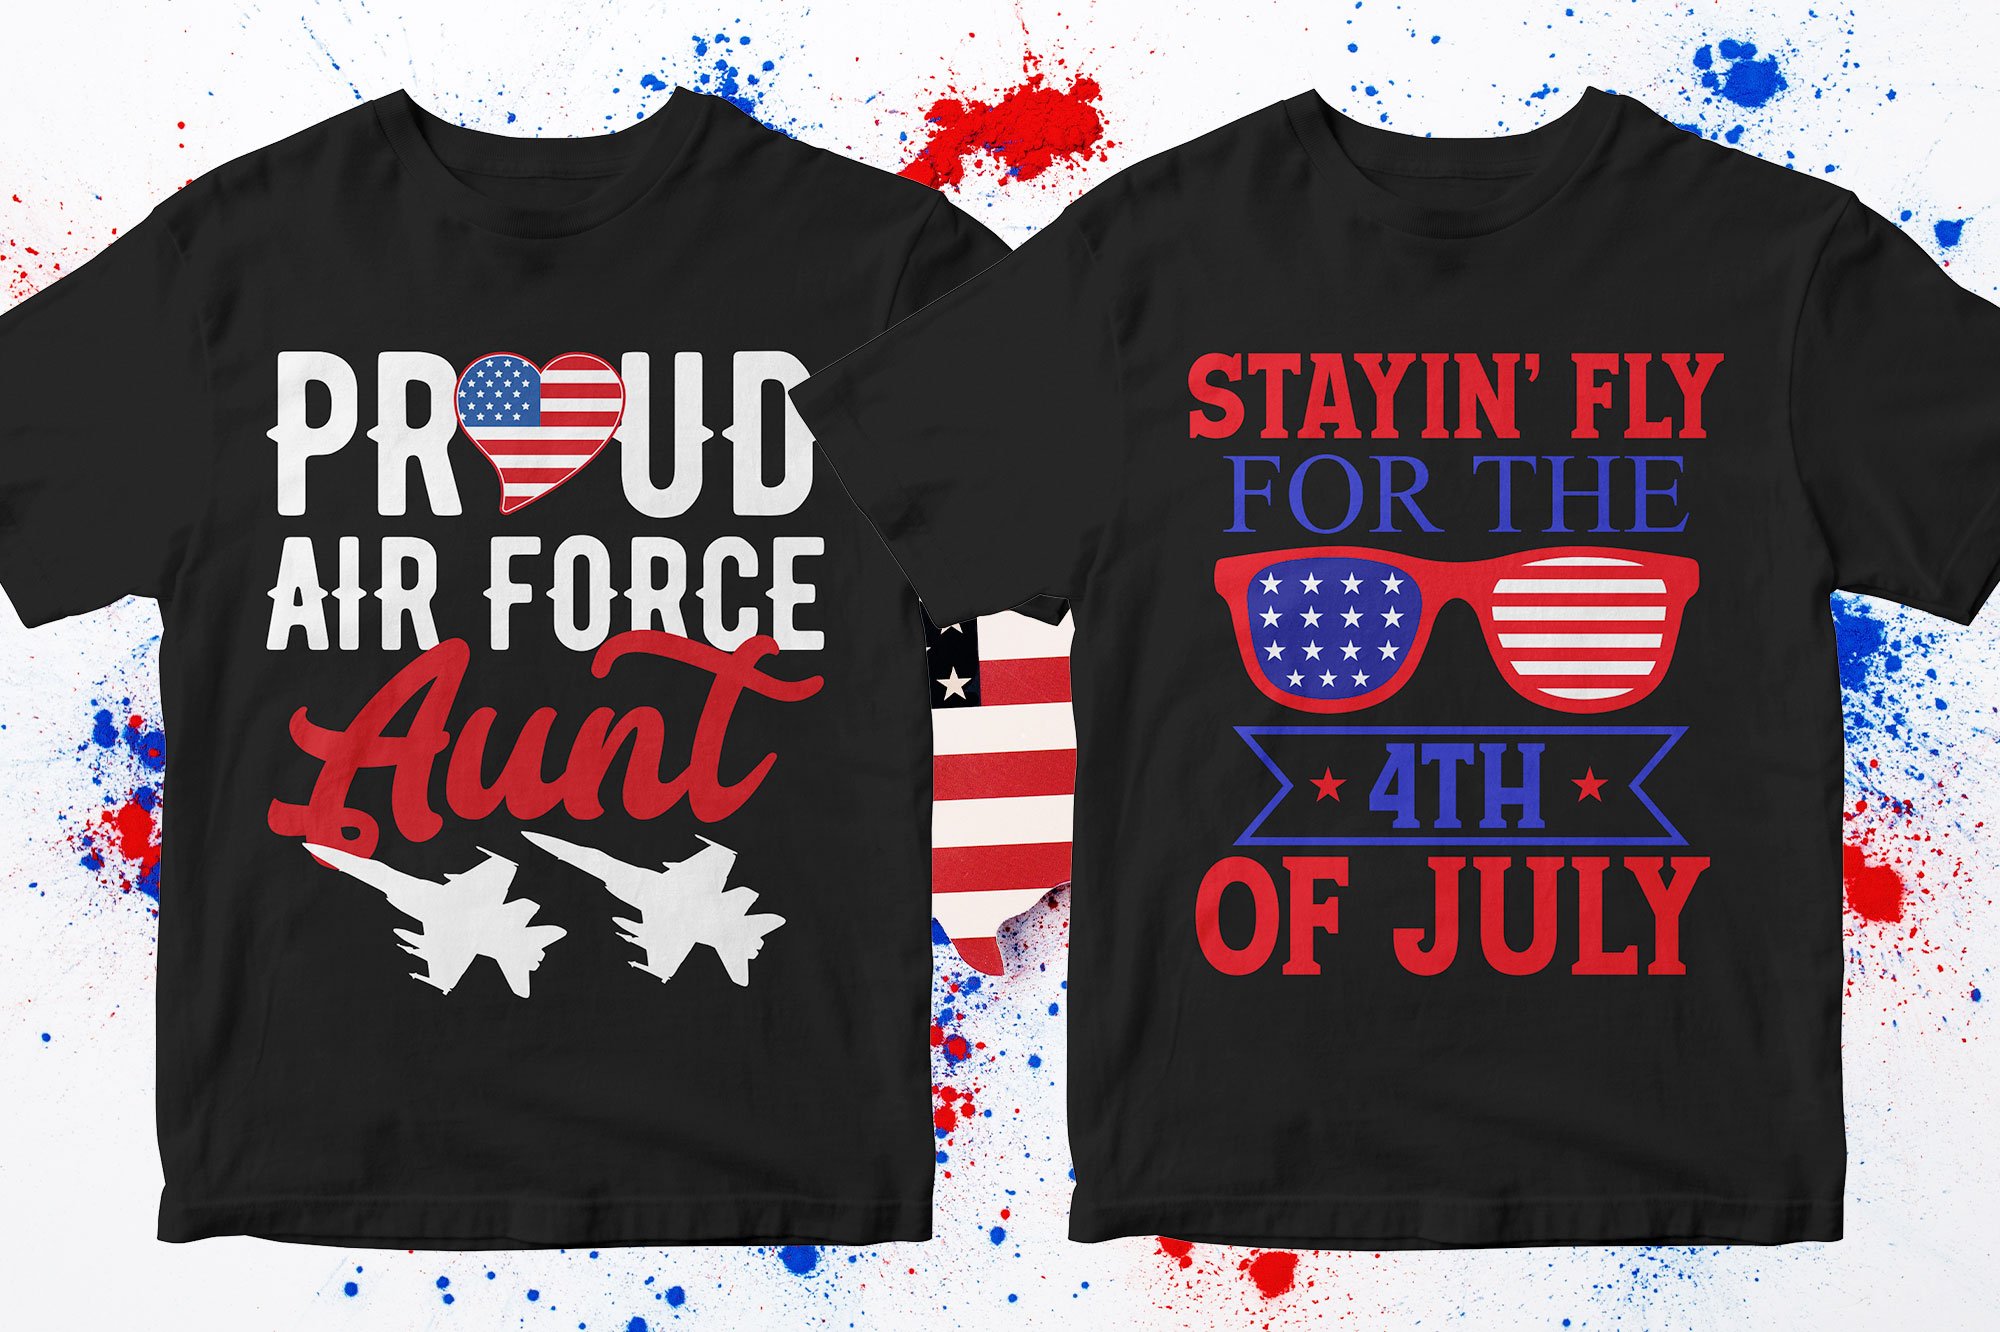 Use these editable designs for celebrating your 4th July.